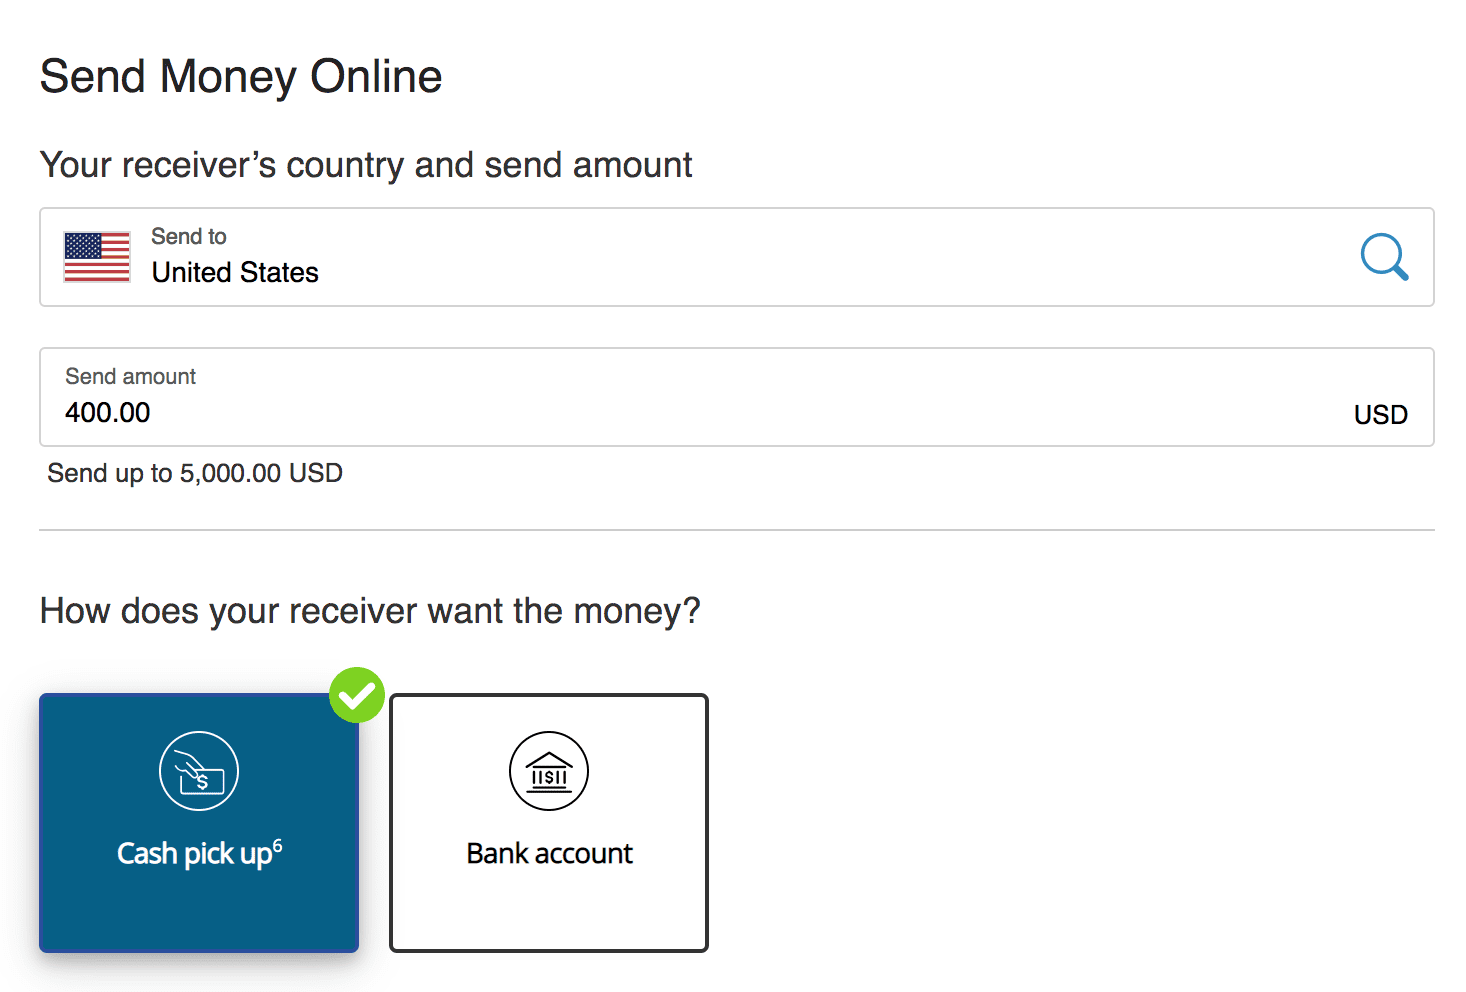 Select the transfer amount